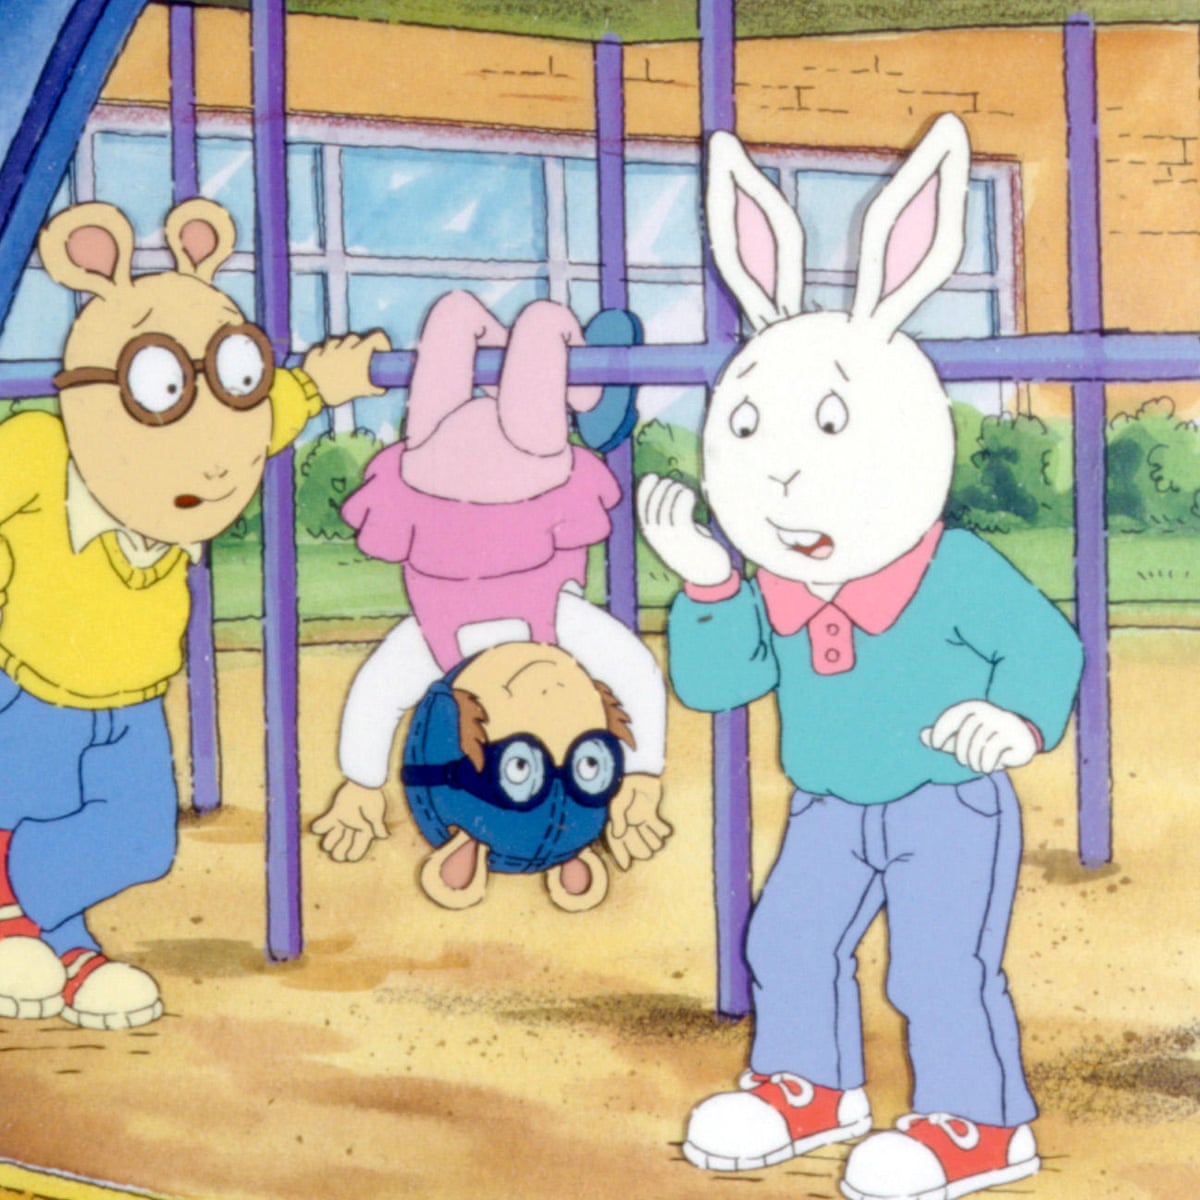 Arthur, children's animated TV series, to end after 25 years | Television |  The Guardian